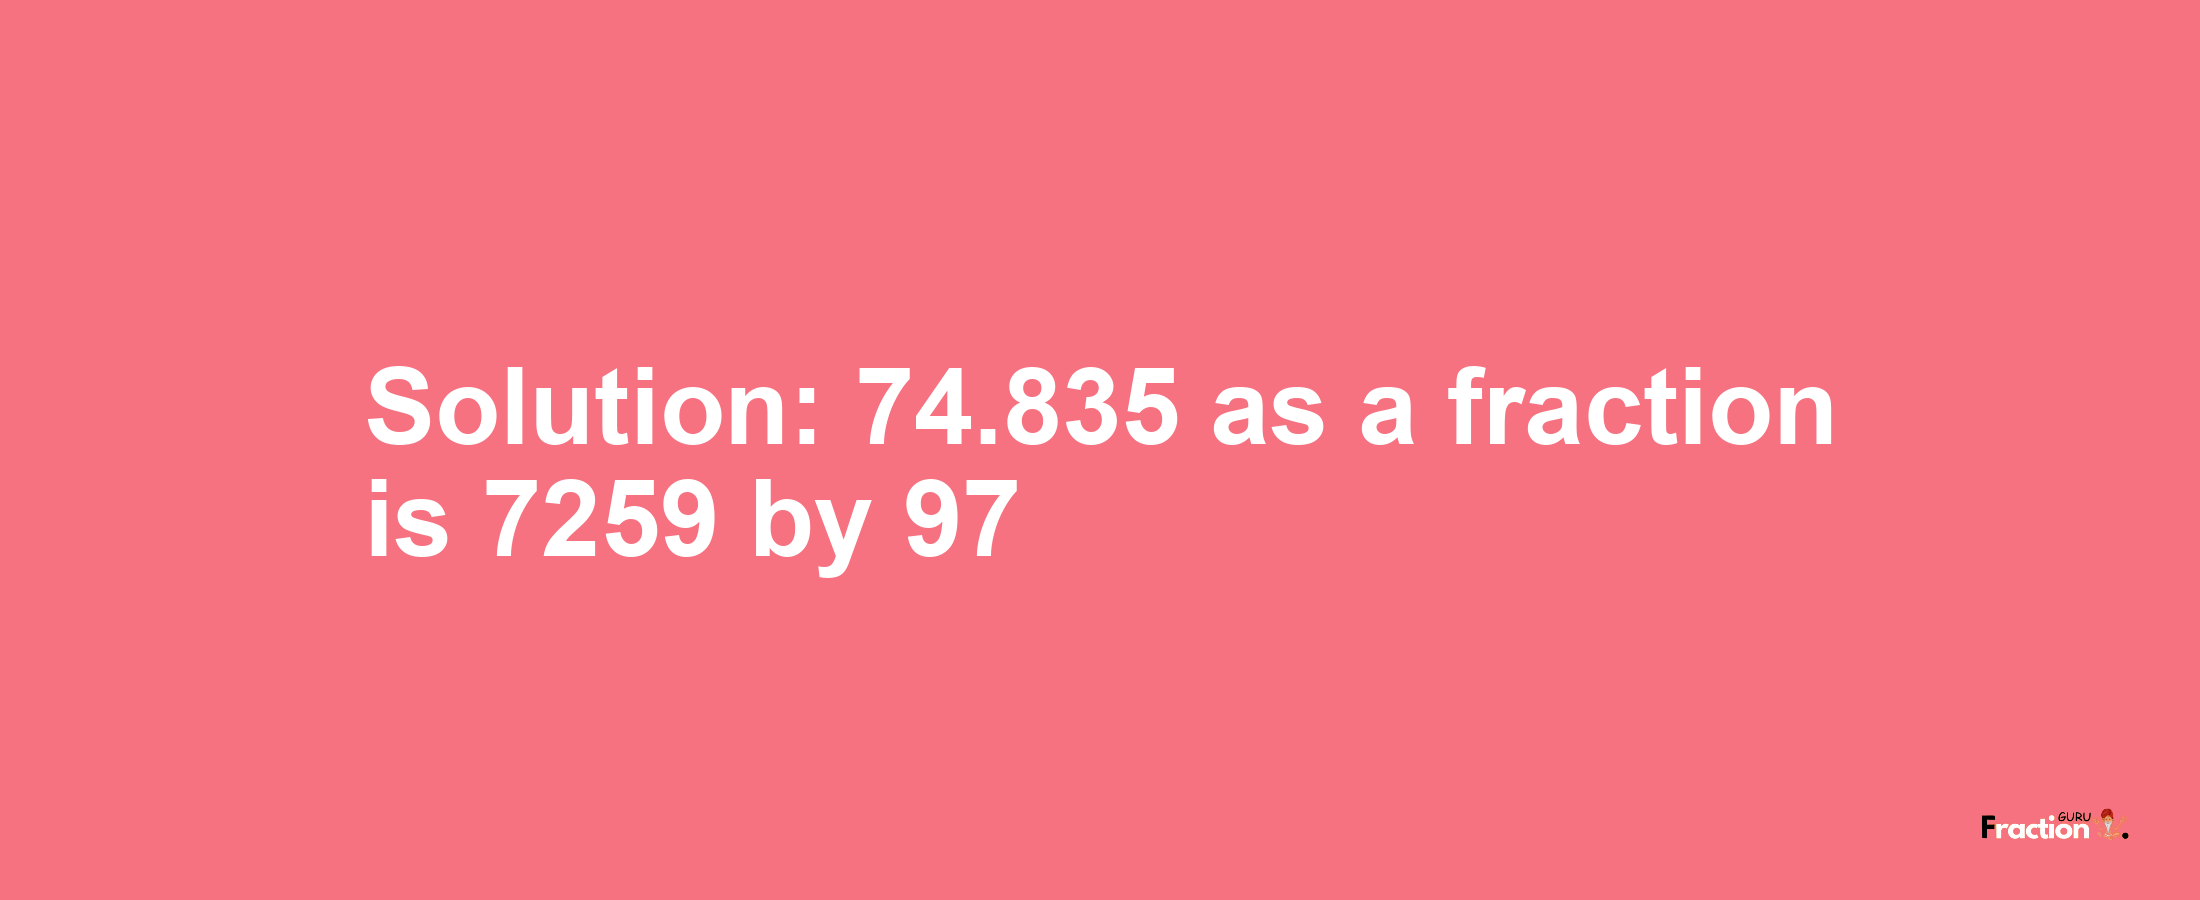 Solution:74.835 as a fraction is 7259/97